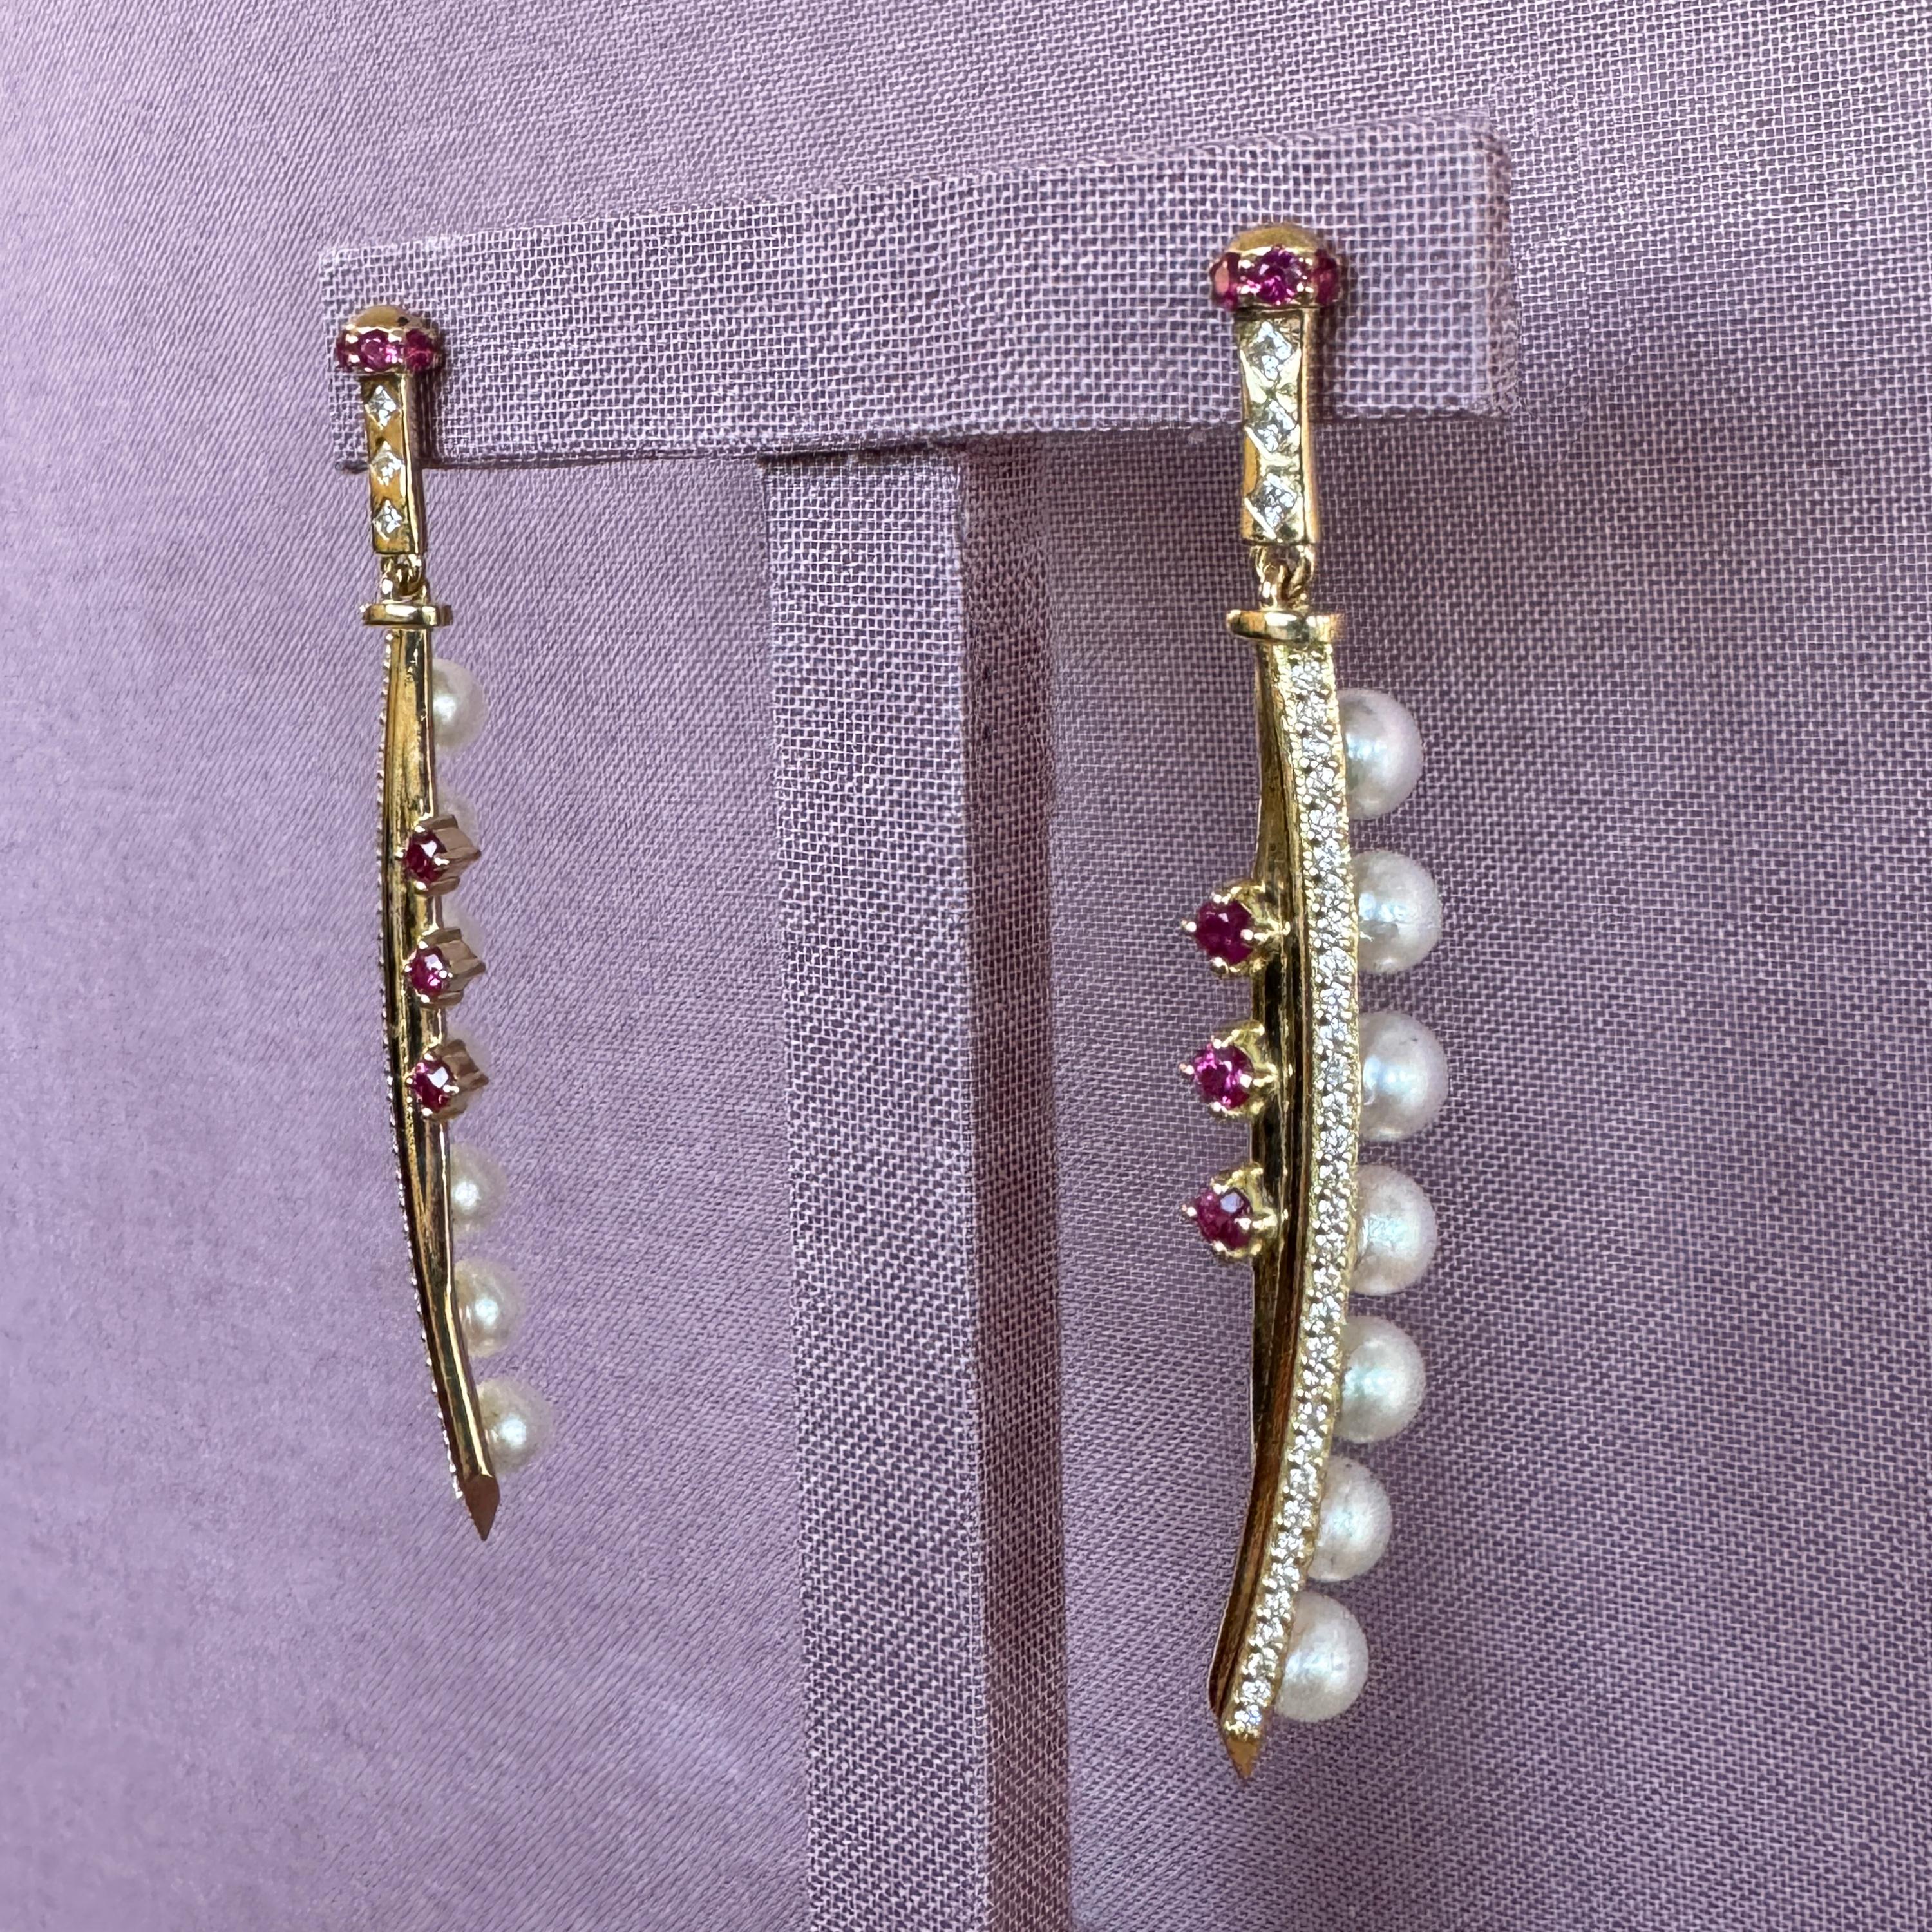 Pear Cut Onna Musha Earrings in 18 Karat Yellow Gold with Diamonds, Rubies And Pearls